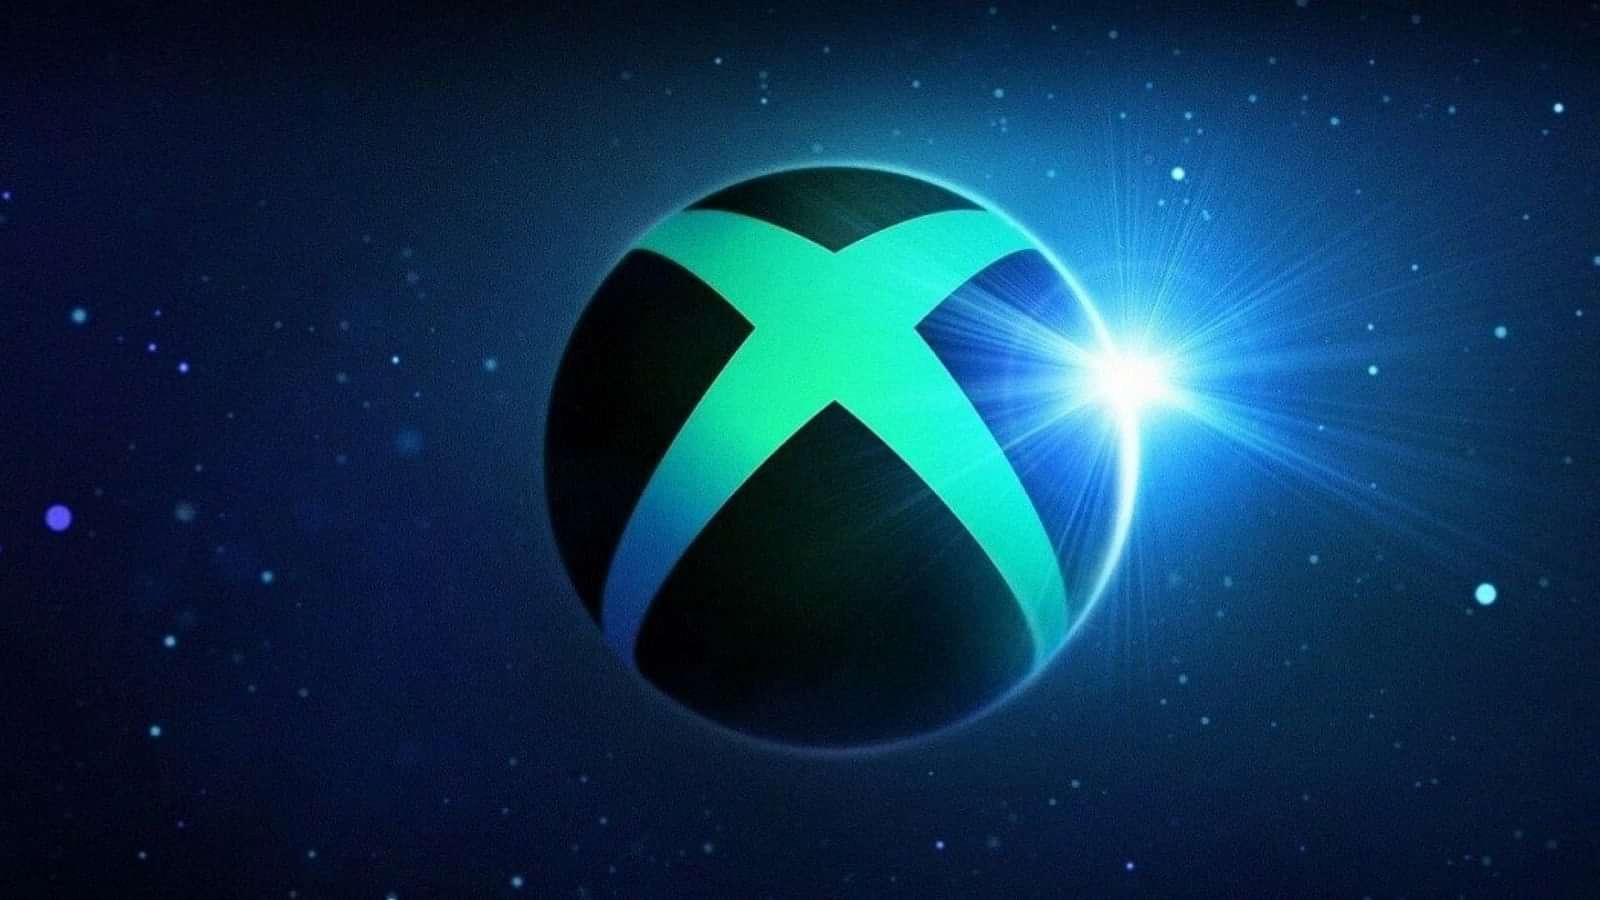 Xbox Game Pass For September 2021: All The Games Coming And Leaving -  GameSpot